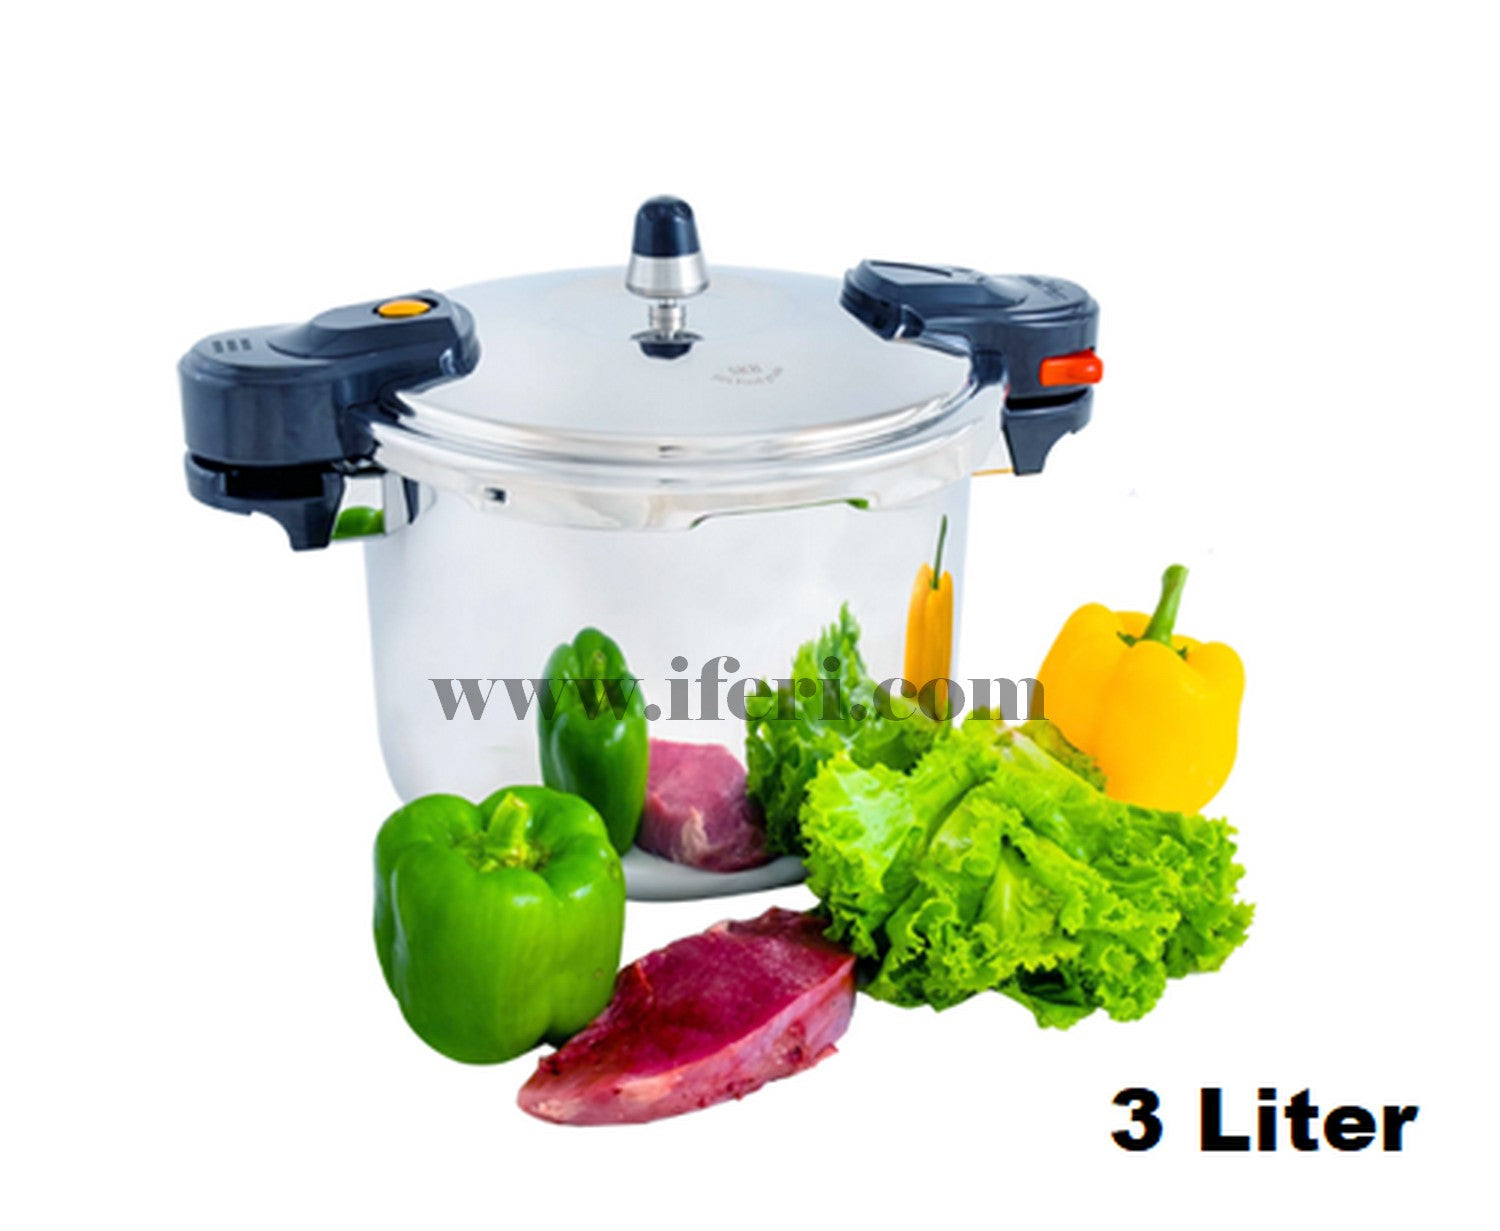 SKB 3 Liter Stainless Steel 3 ply Pressure Cooker 3P-PC-03